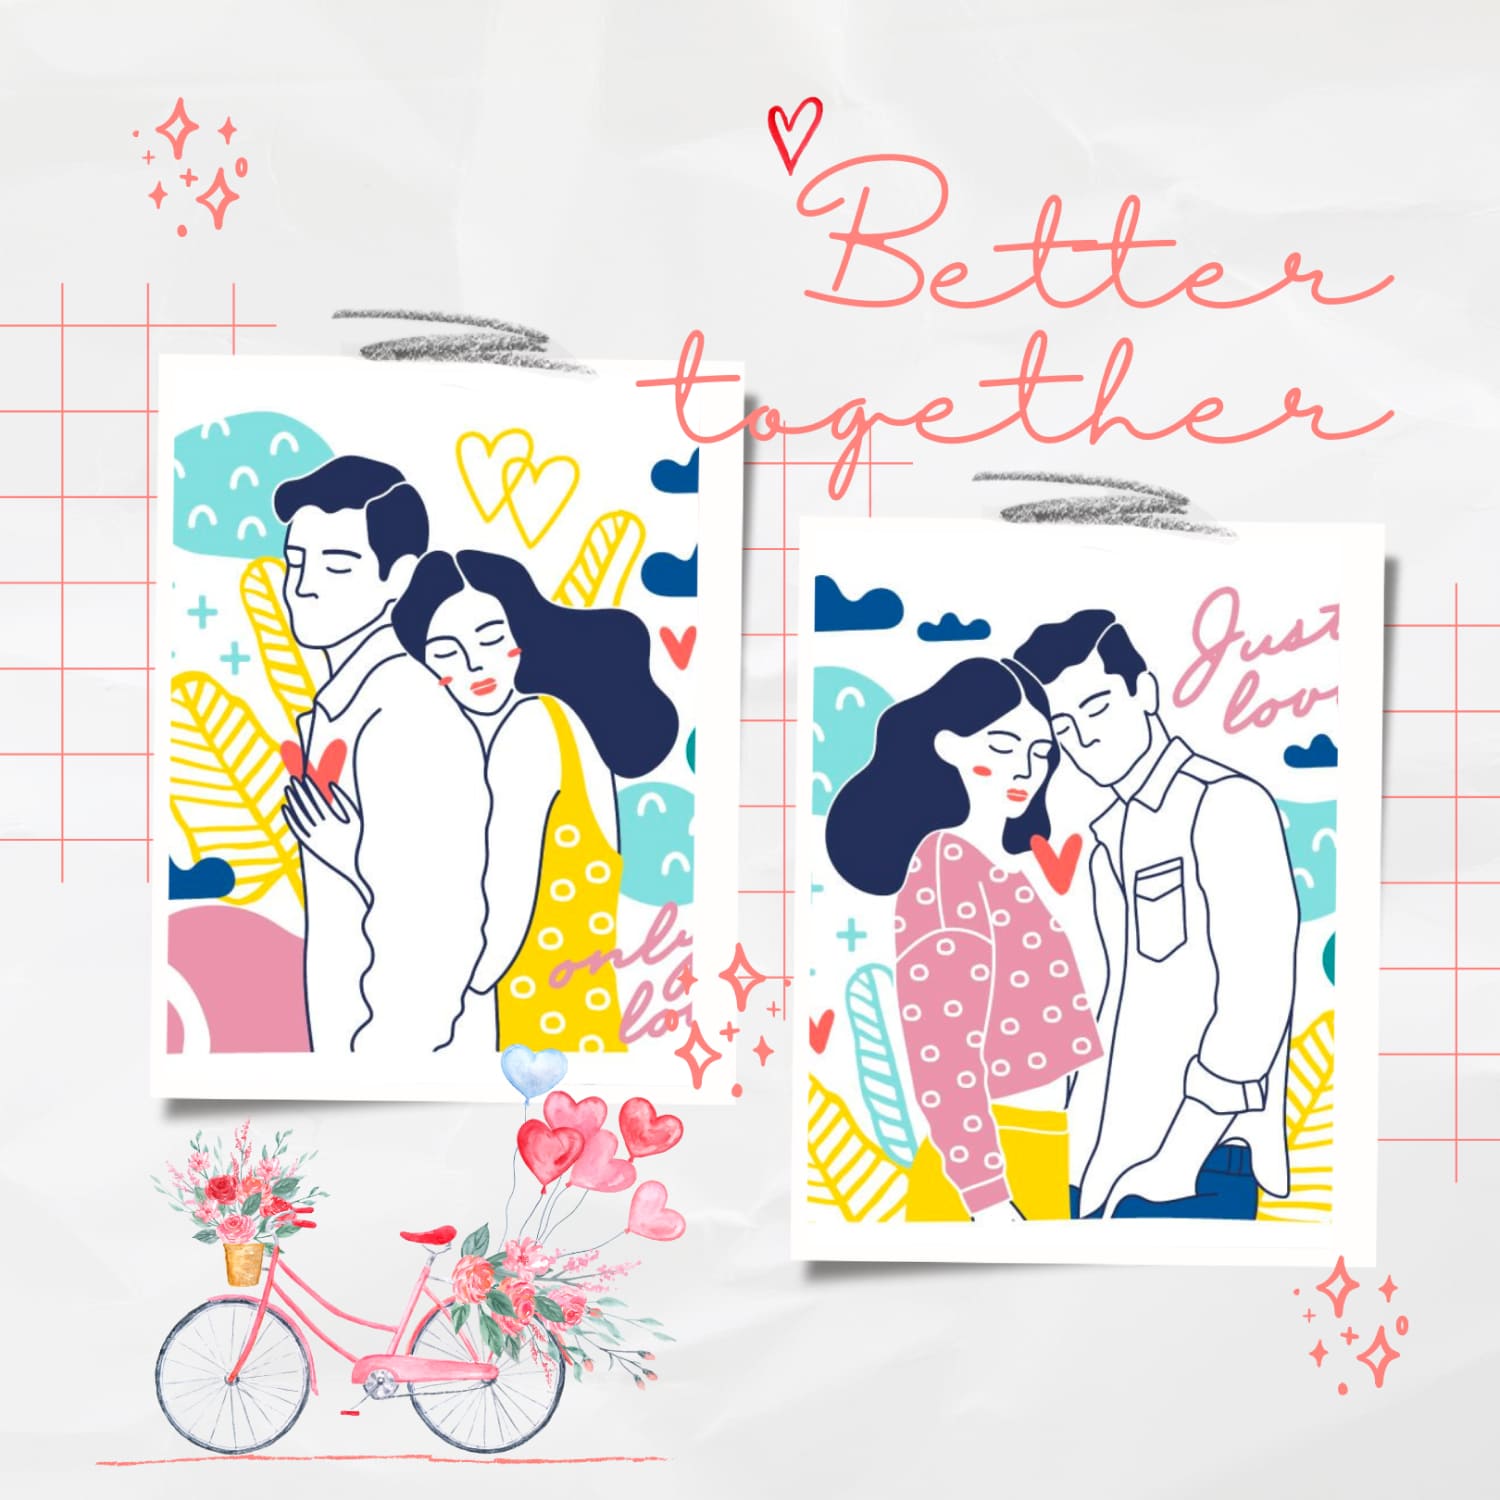 Better Together | Couples in love - main image preview.